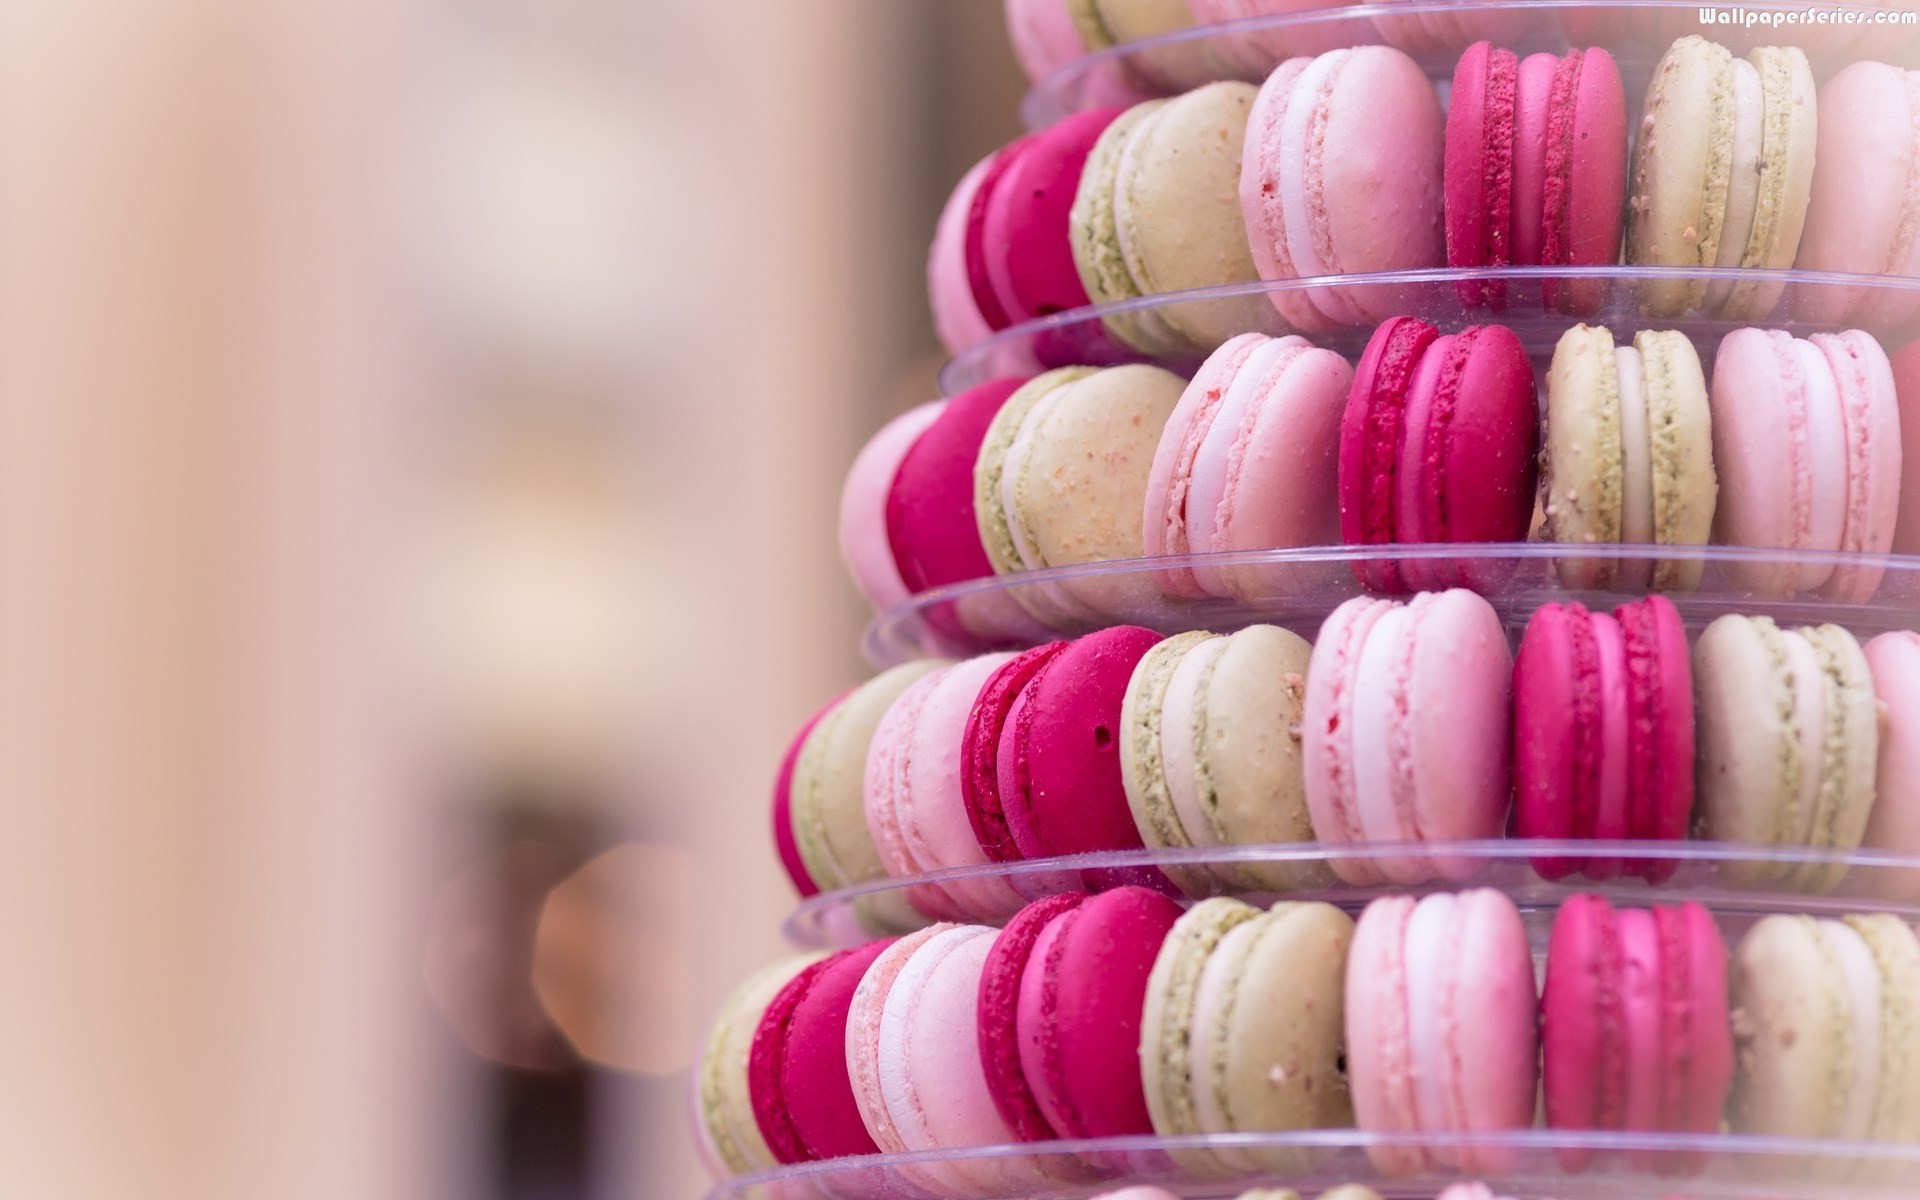 Macaron Image And Wallpaper For Mac Pc B Scb Wp Bg Collection